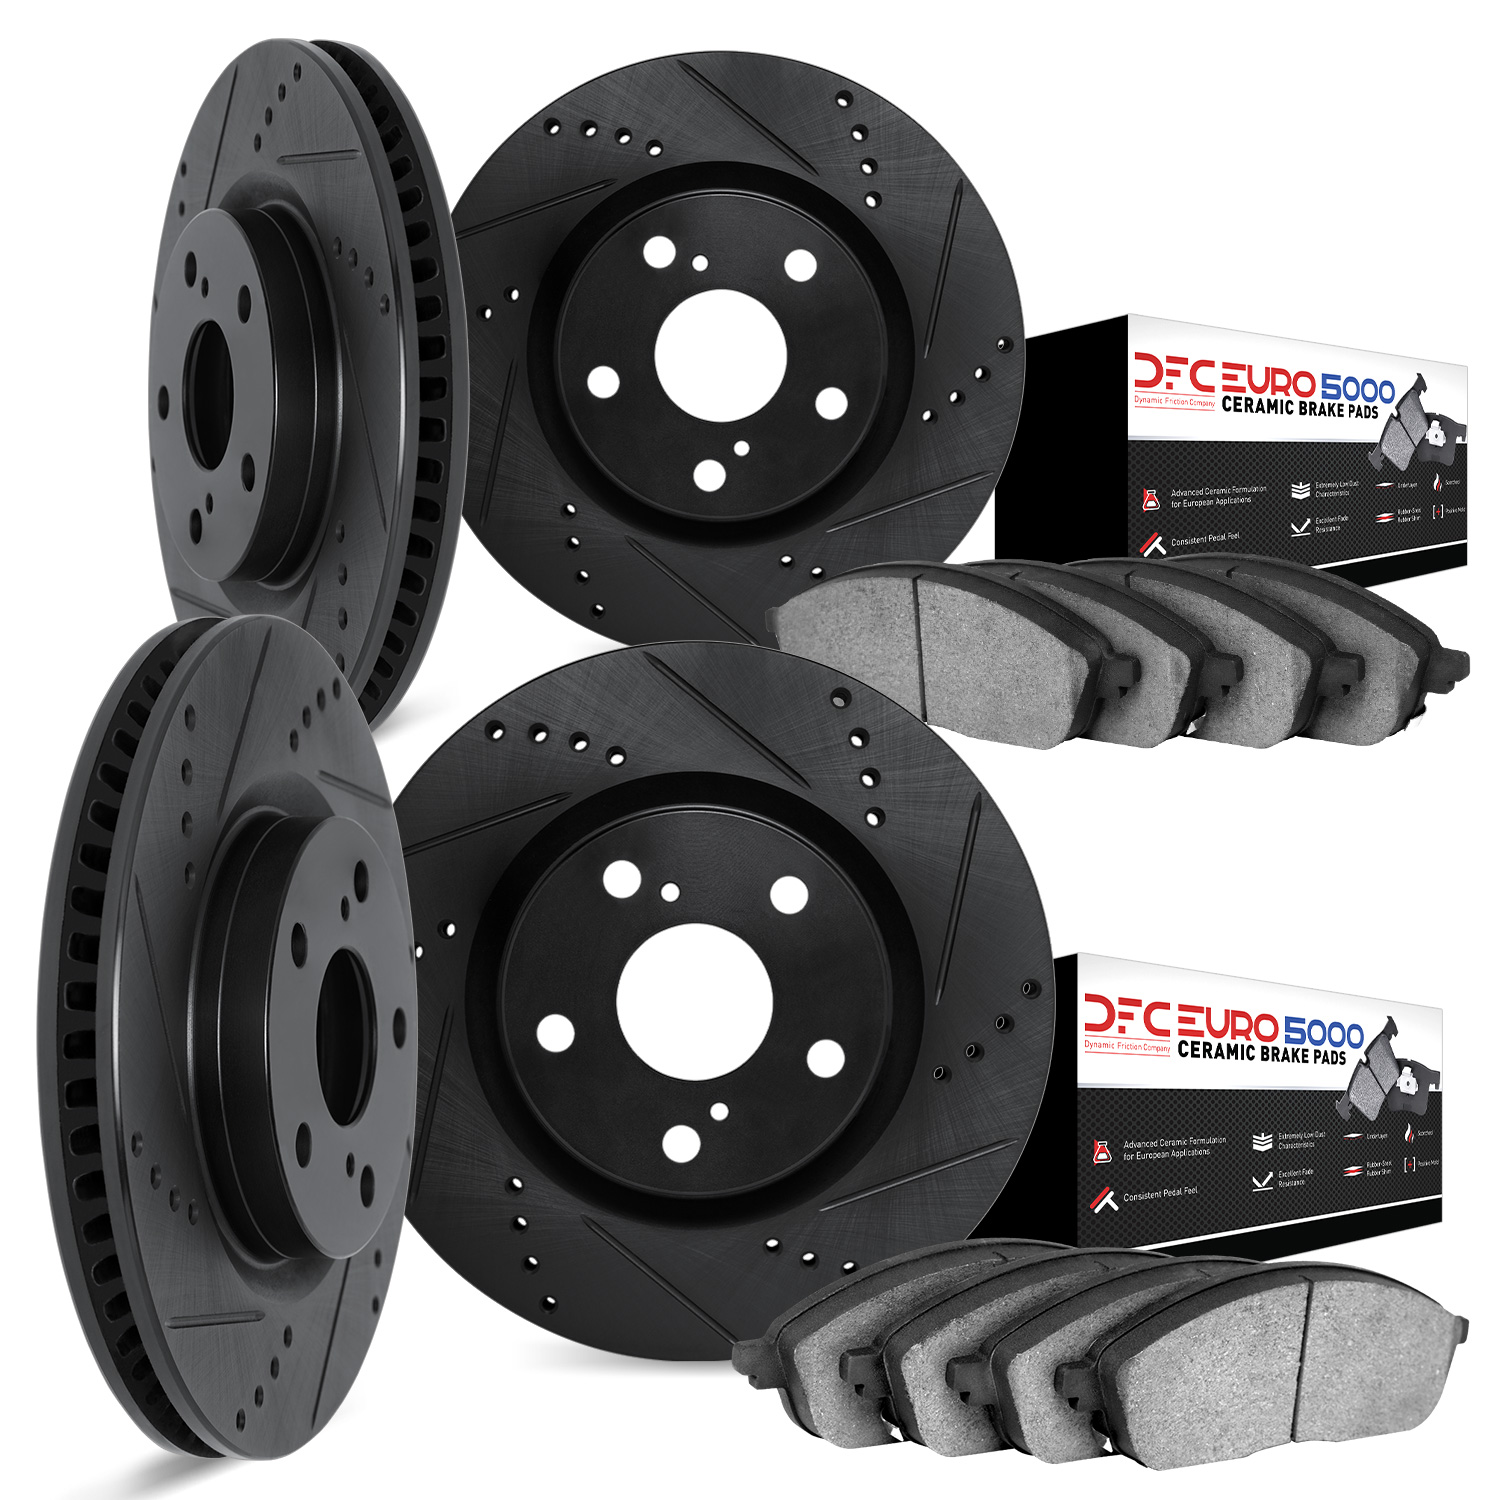 8604-31037 Drilled/Slotted Brake Rotors w/5000 Euro Ceramic Brake Pads Kit [Black], Fits Select BMW, Position: Front and Rear